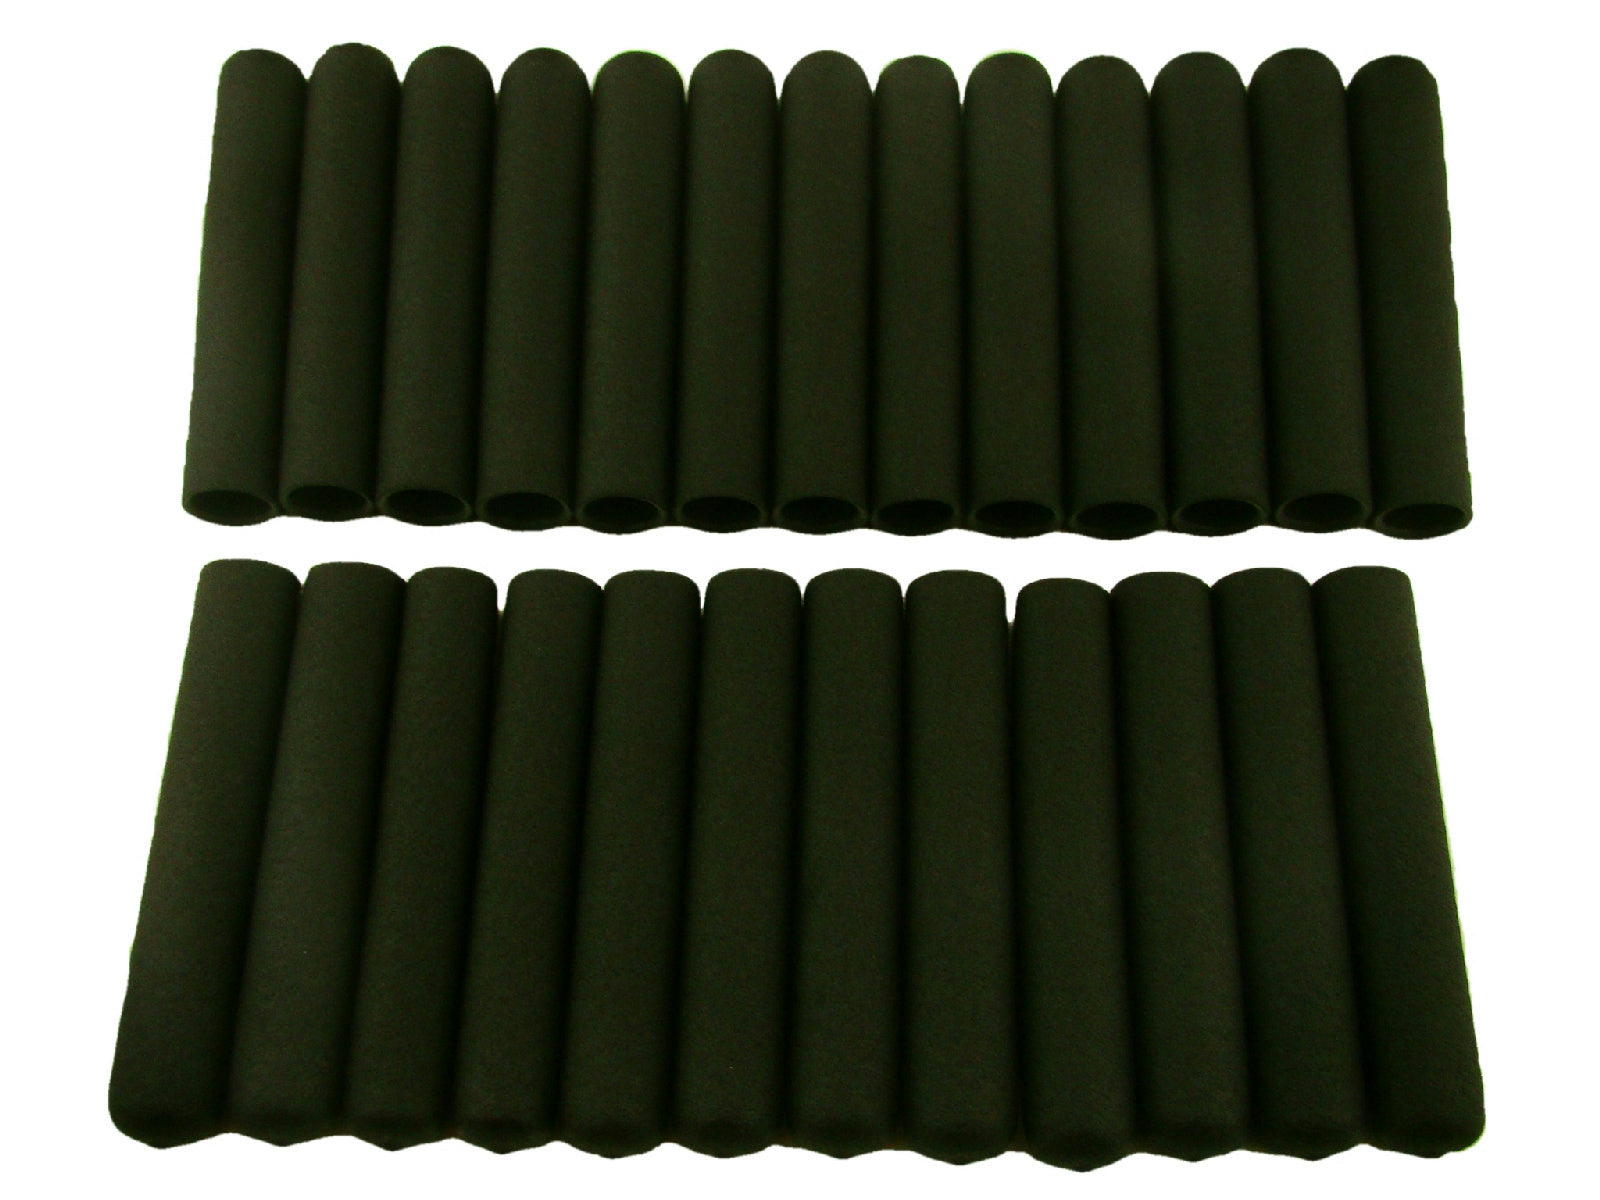 Lot of 25 Black Soft Grips - Designed for 3/4" Handles - Wall Thickness 1/8"